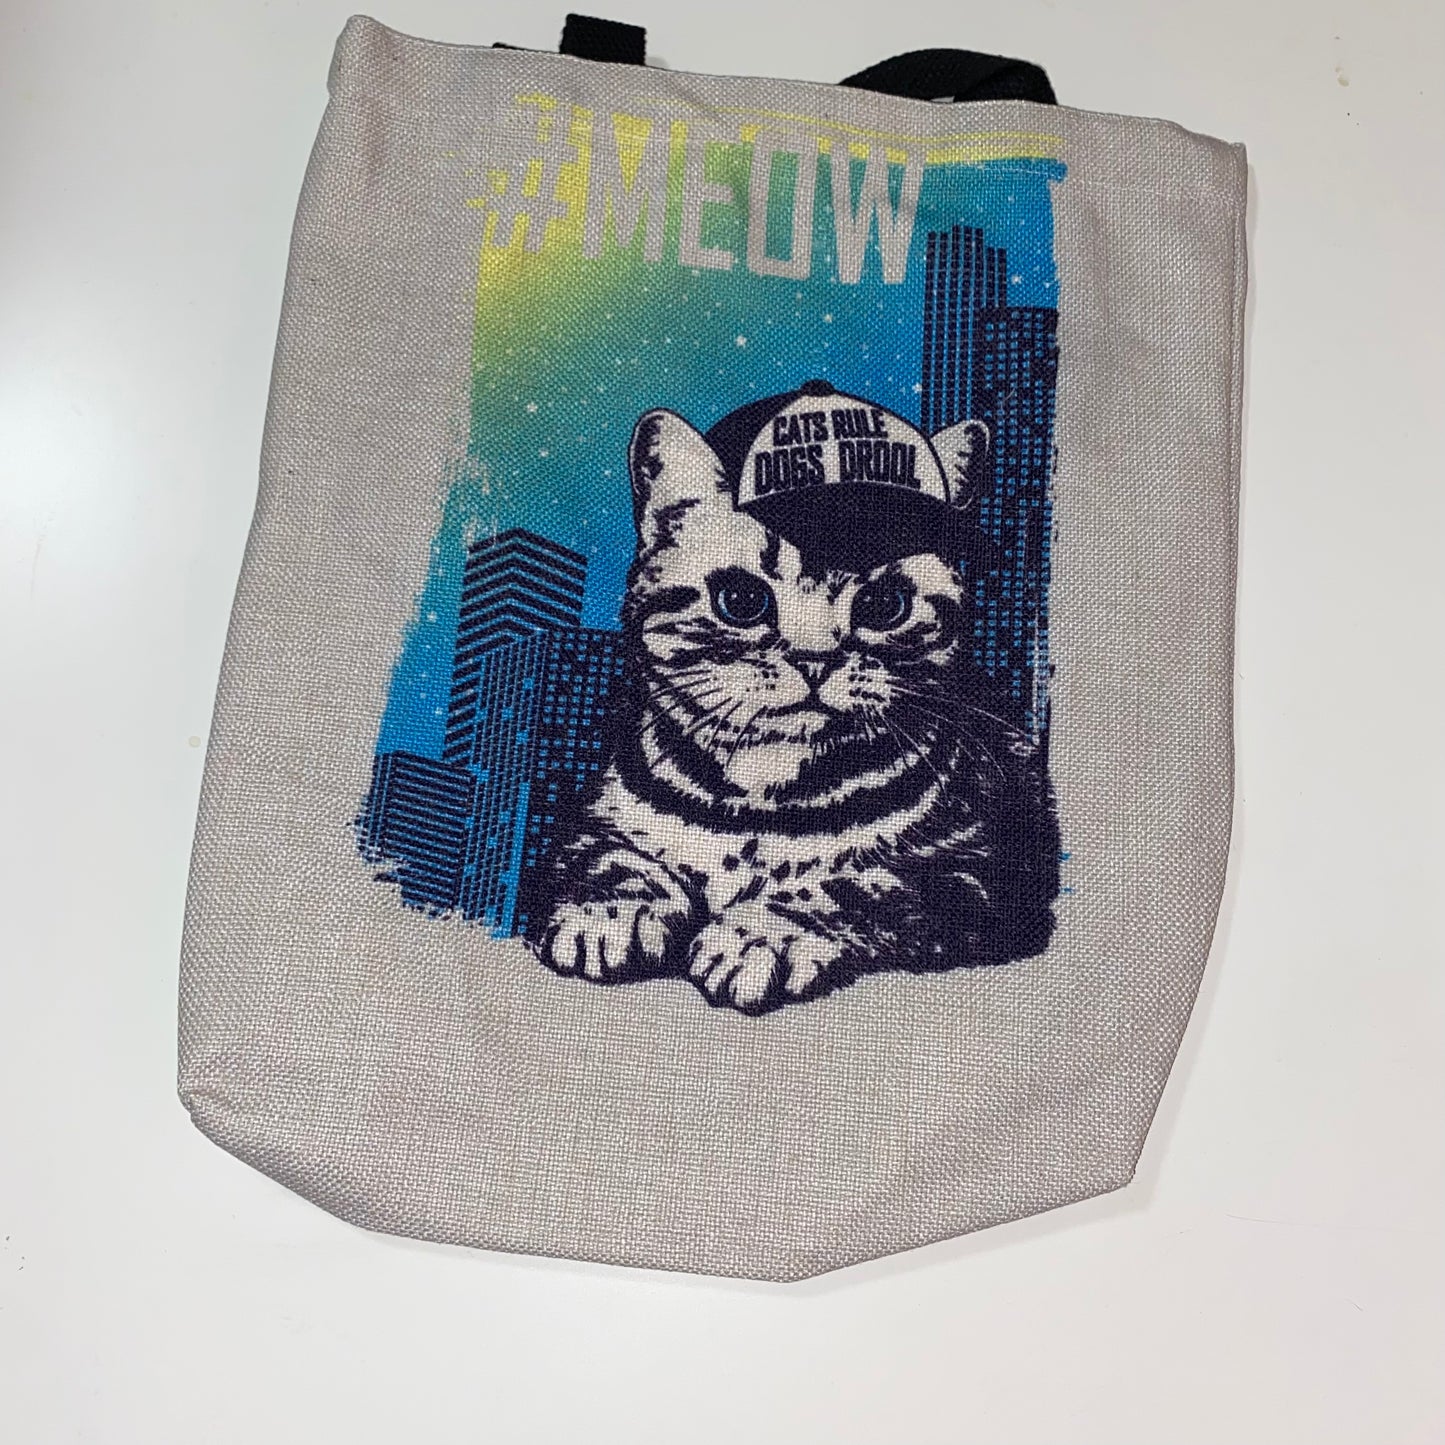 Cats Rule Dogs Drool #Meow Tote